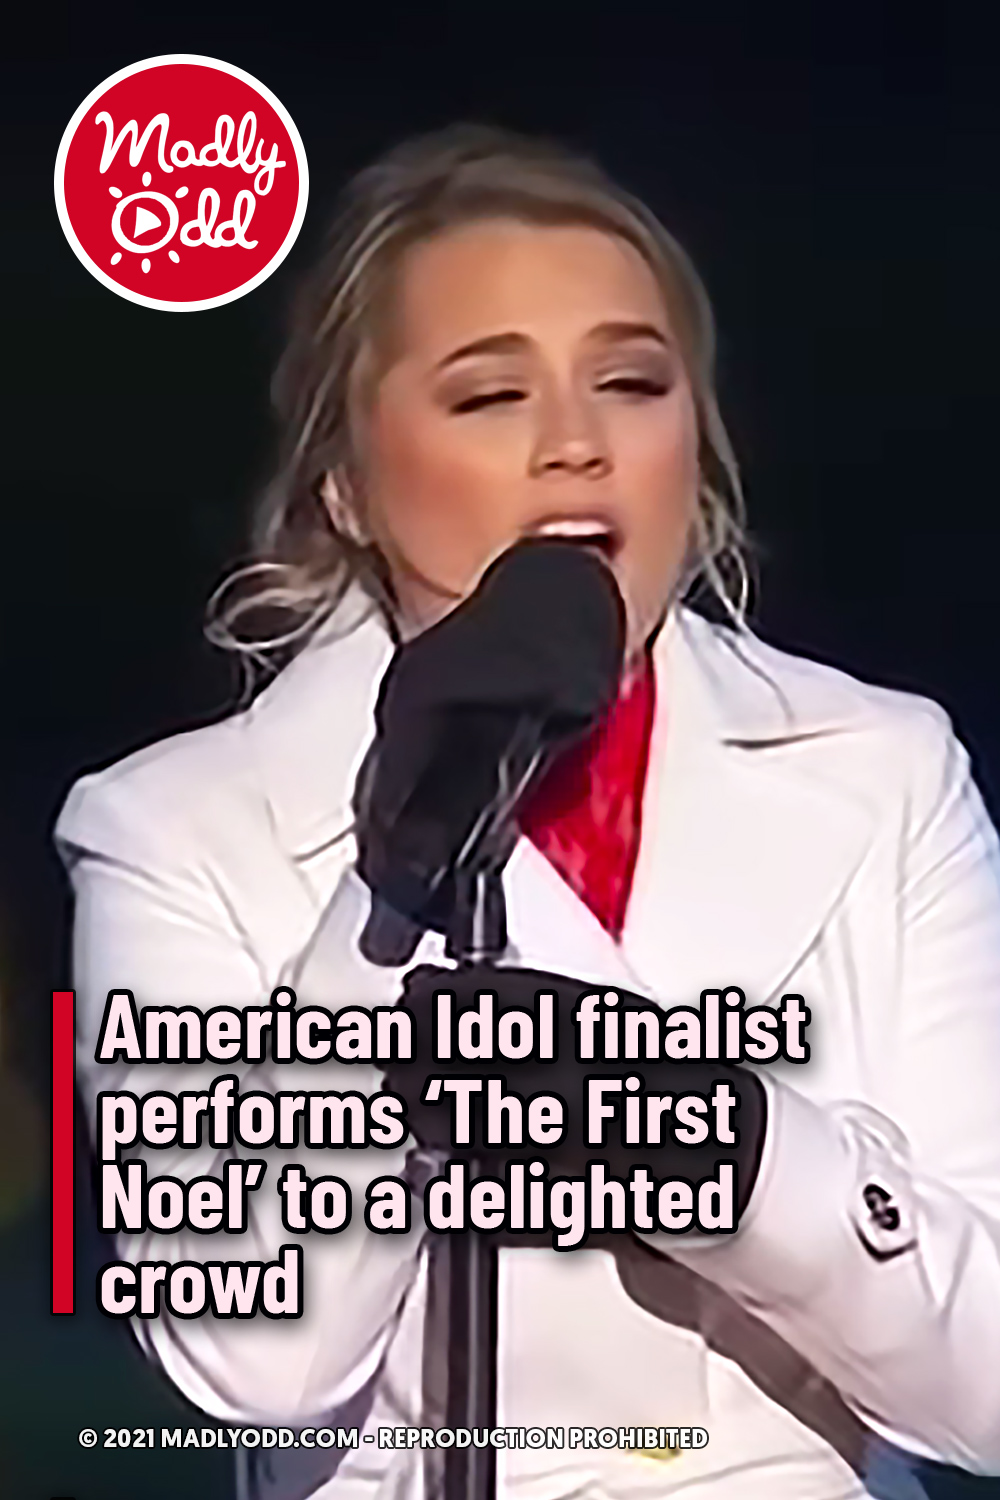 American Idol finalist performs ‘The First Noel’ to a delighted crowd